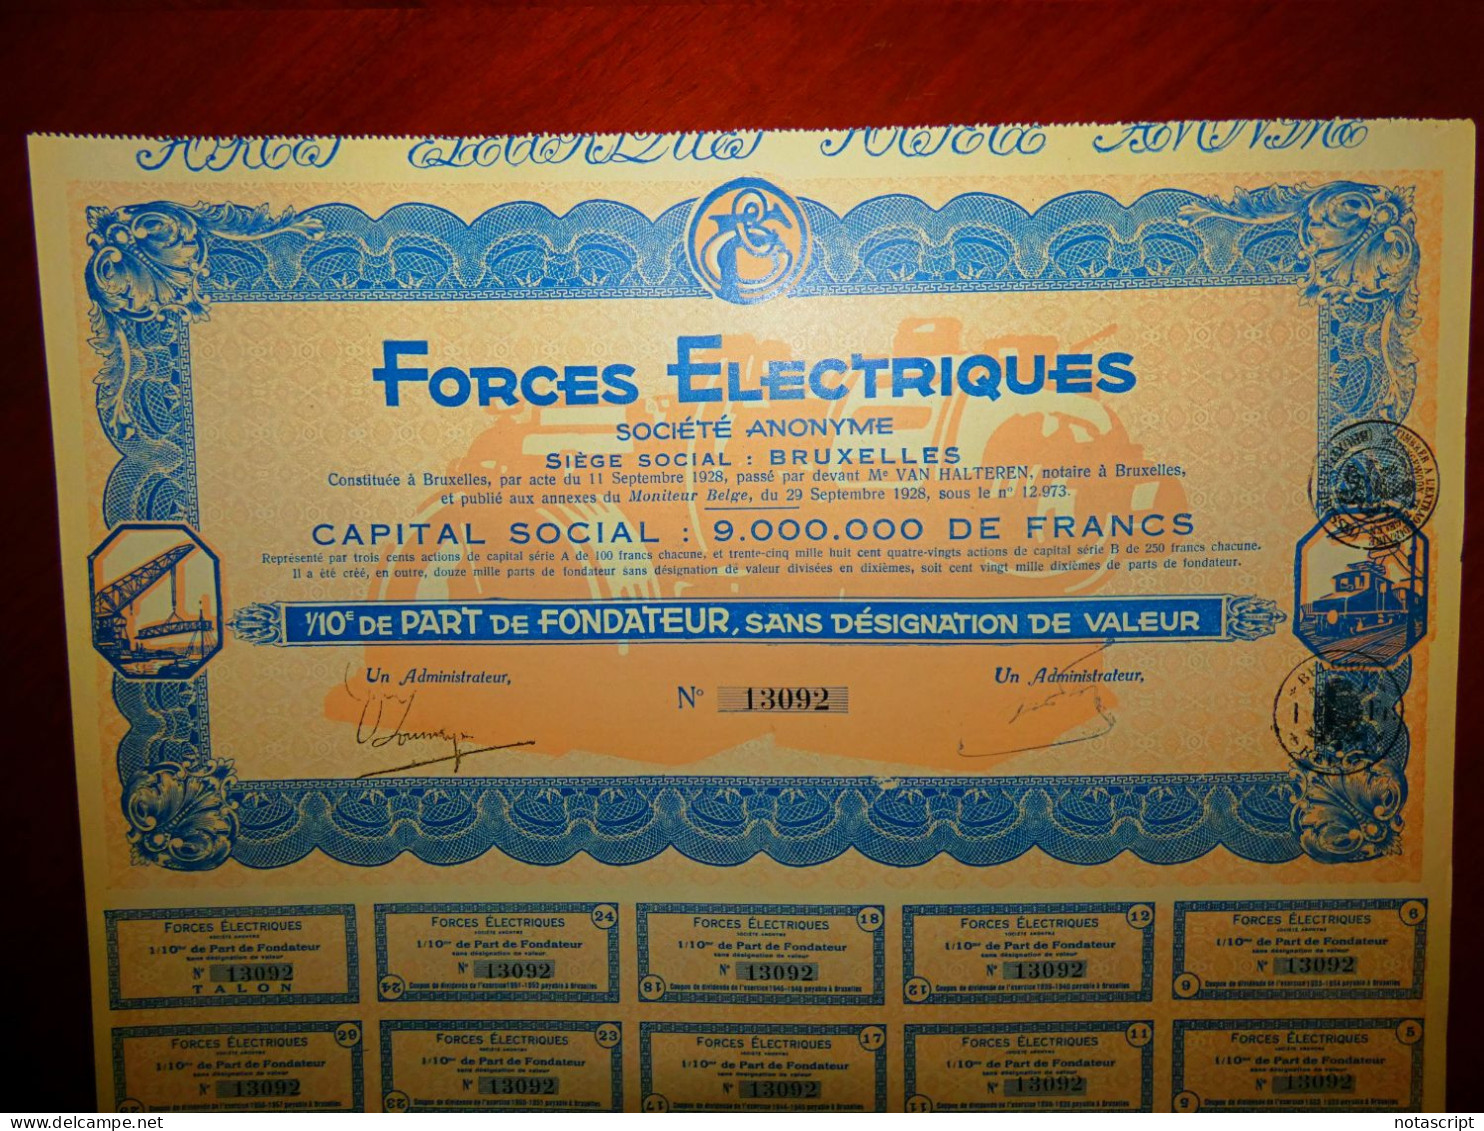 Forces Electriques SA 1928 Brussels ,share Certificate - Electricity & Gas